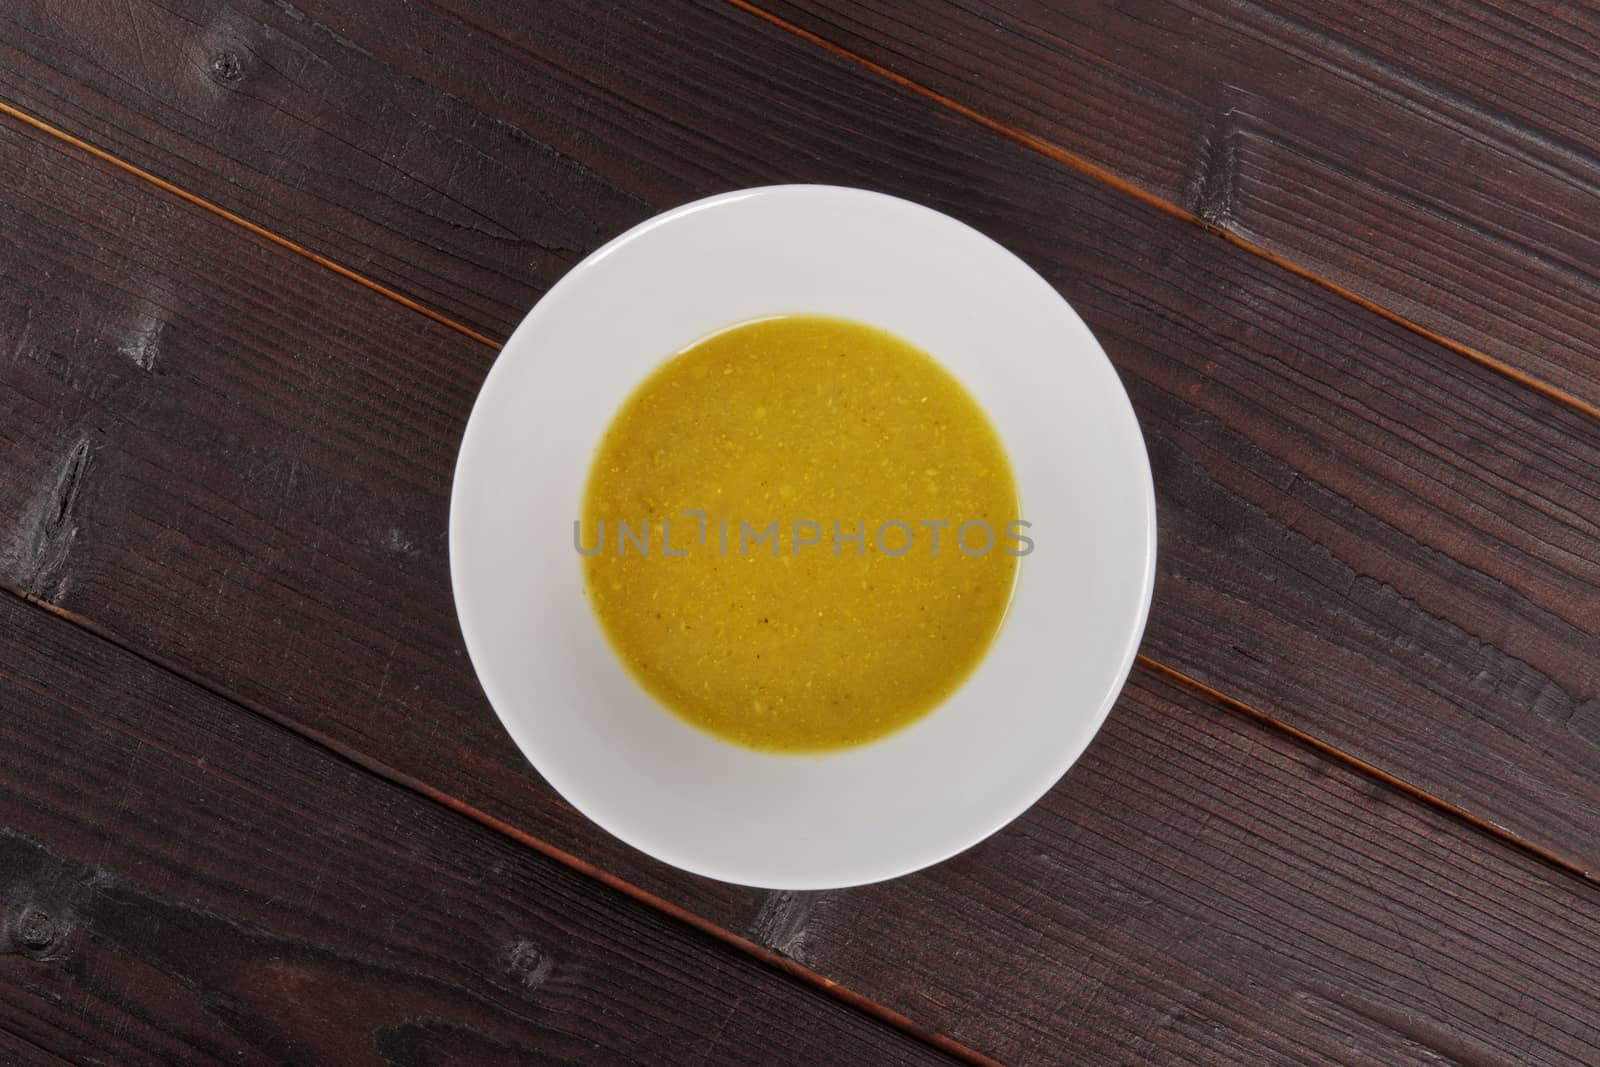 Creamy broccoli soup on a wooden table